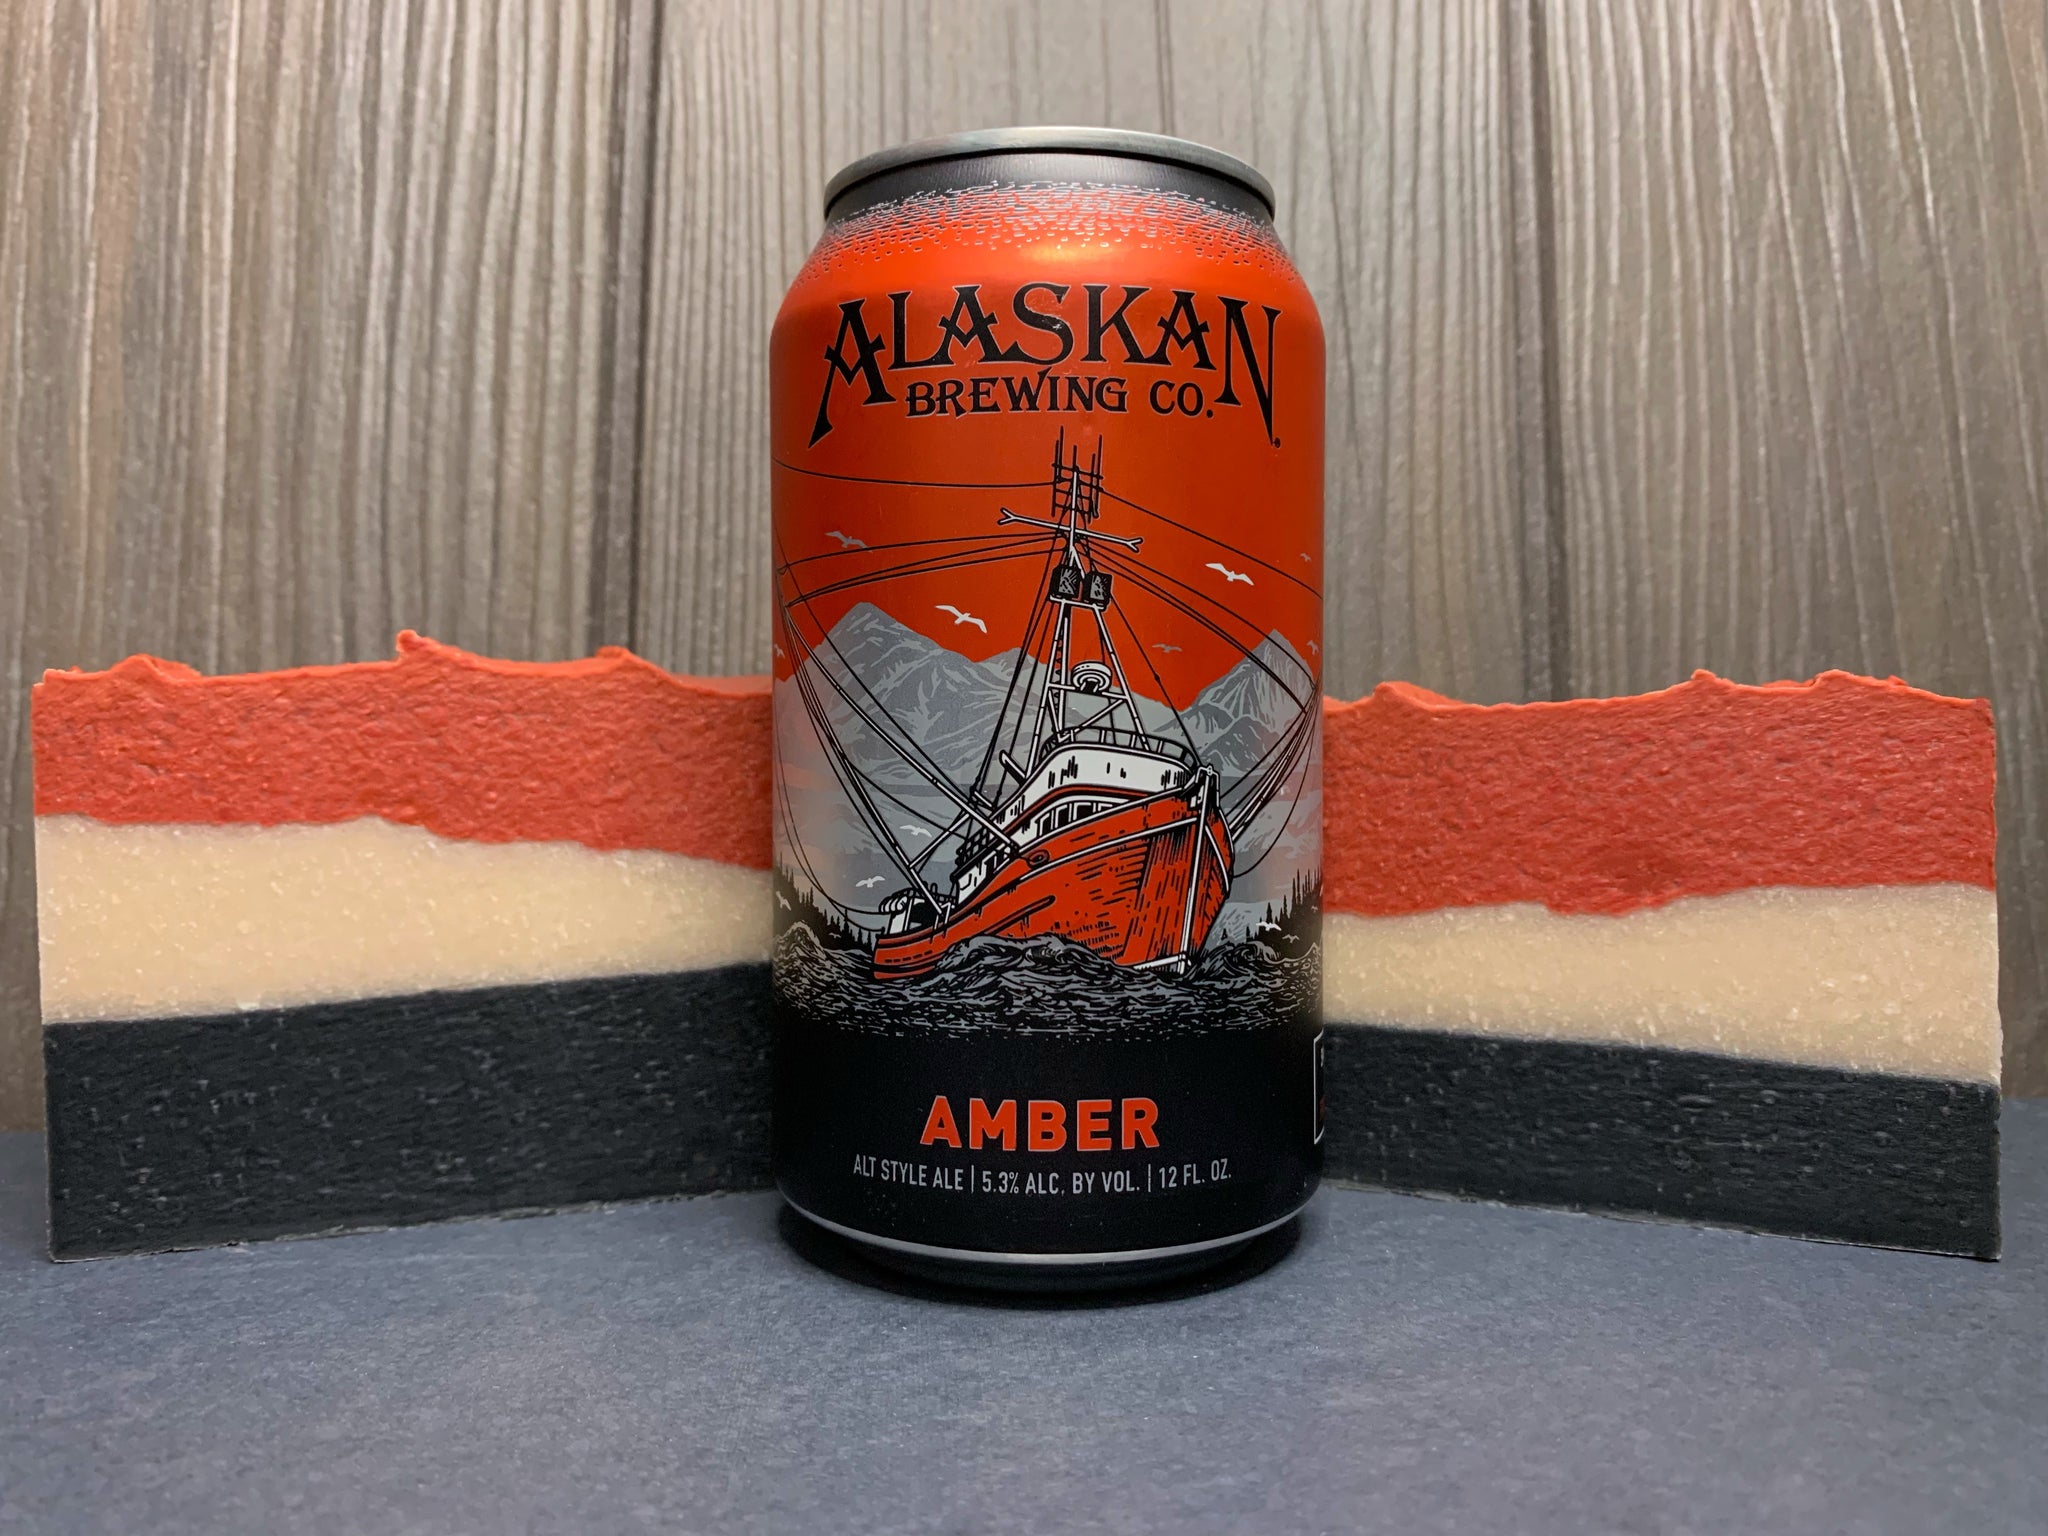 red cream and black beer soap for him handcrafted with amber alt style ale from alaskan brewing co Alaska brewery layered beer soap by spunkndisorderly craft beer soap beer soap for him with activated charcoal